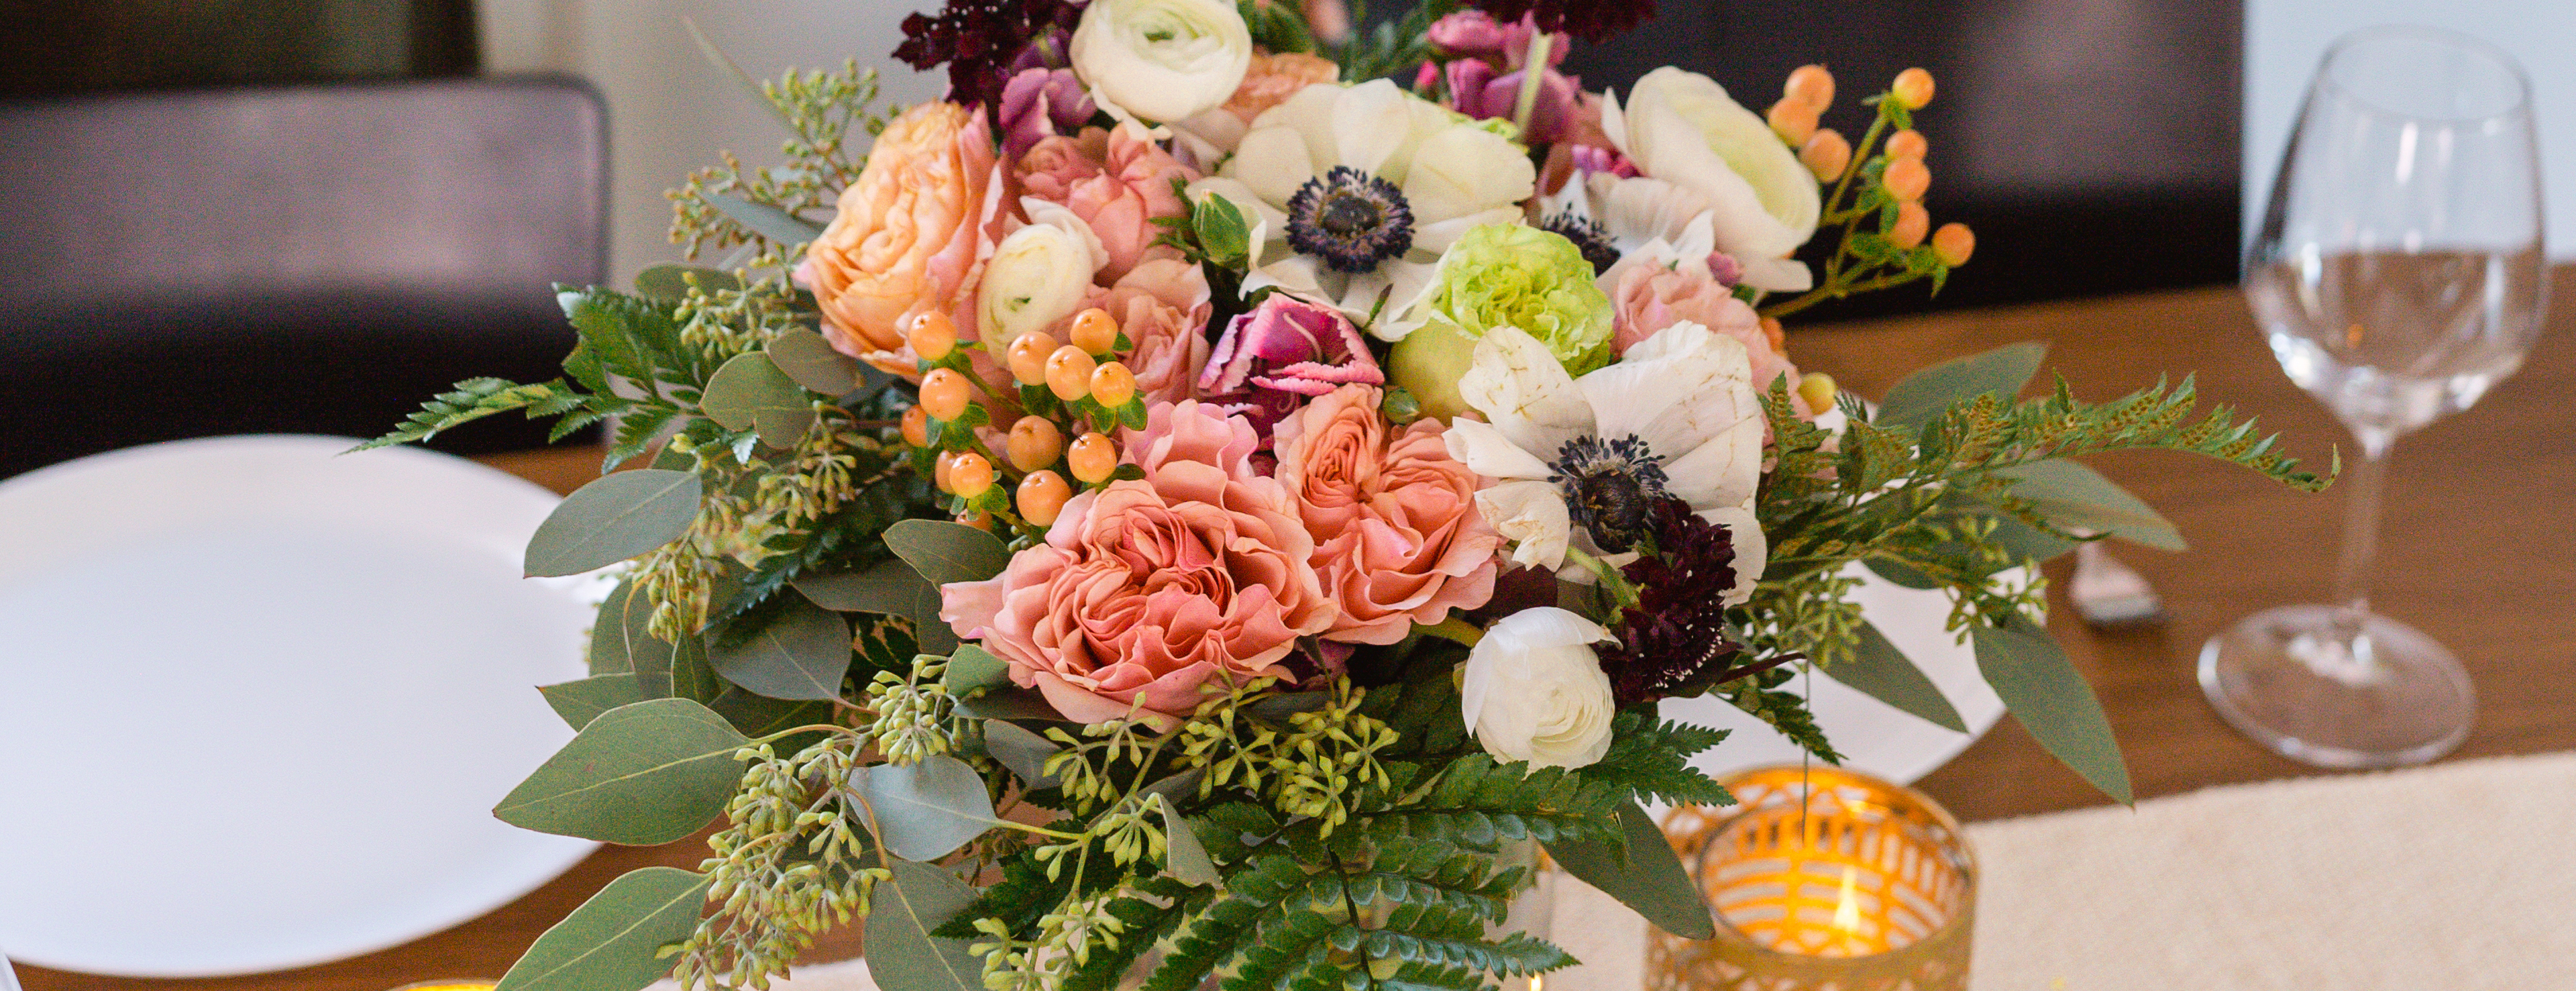 A colorful floral bouquet tablescape for wedding anniversary party